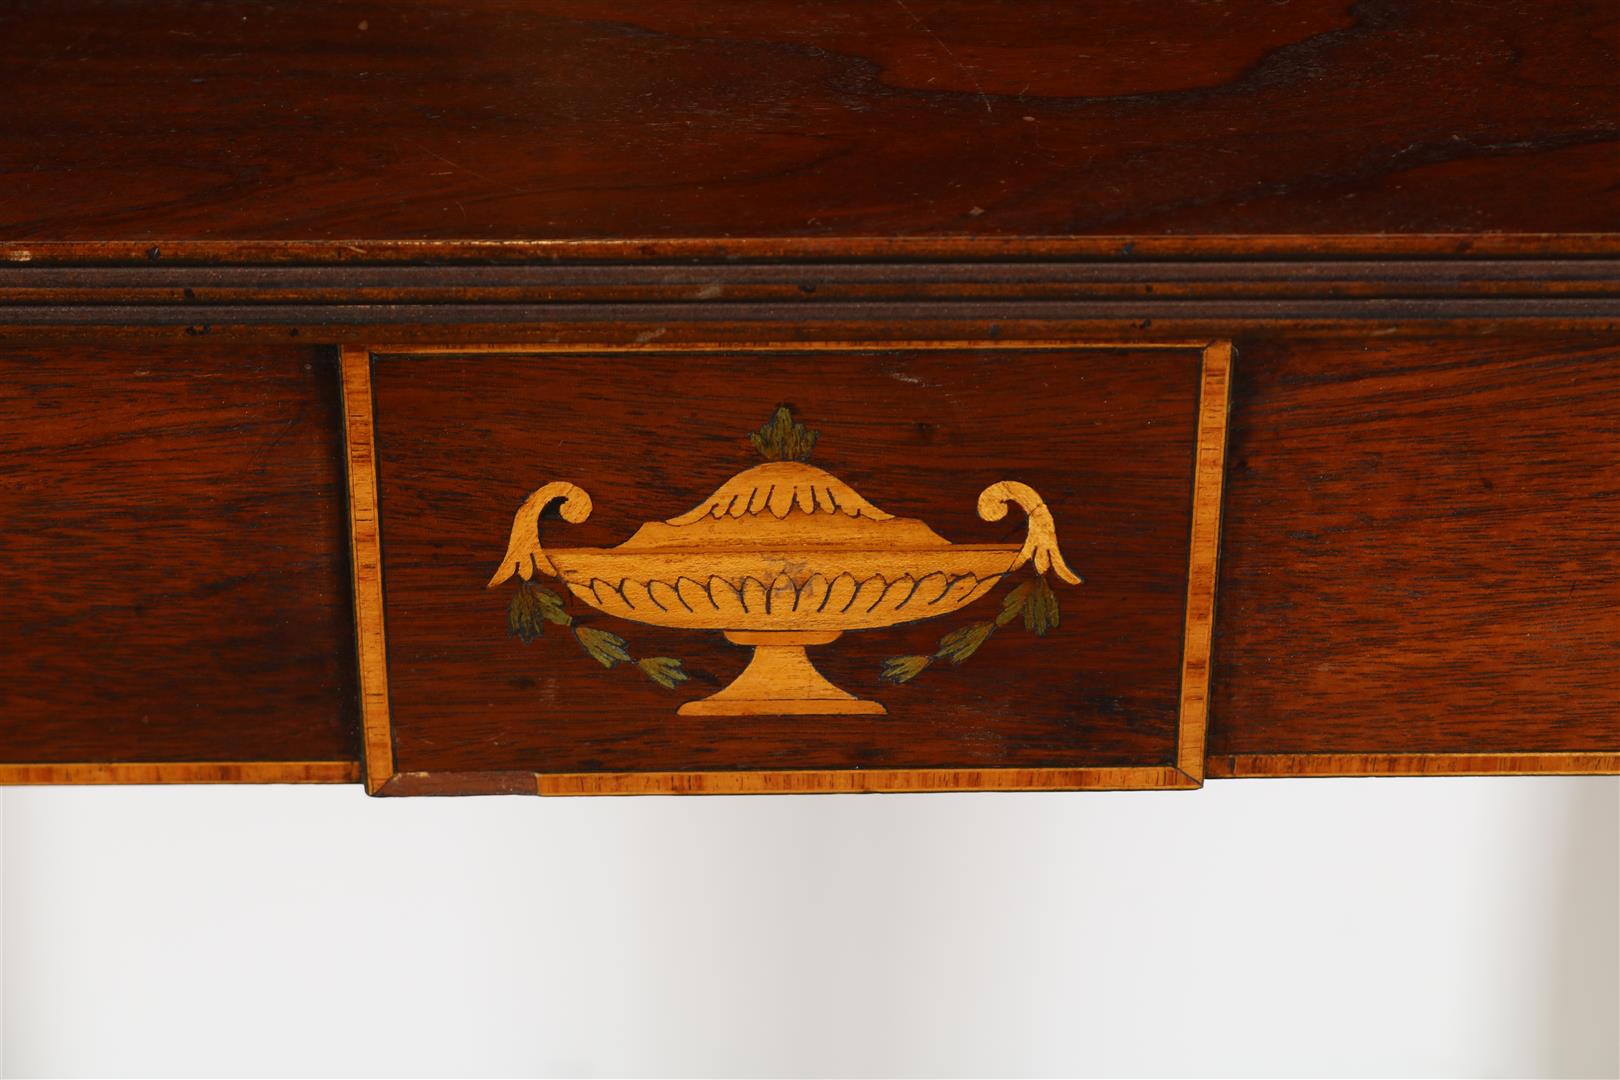 Mahogany Georgian-style coffee/breakfast table with folding top, inlaid vase in skirting boards - Image 4 of 6